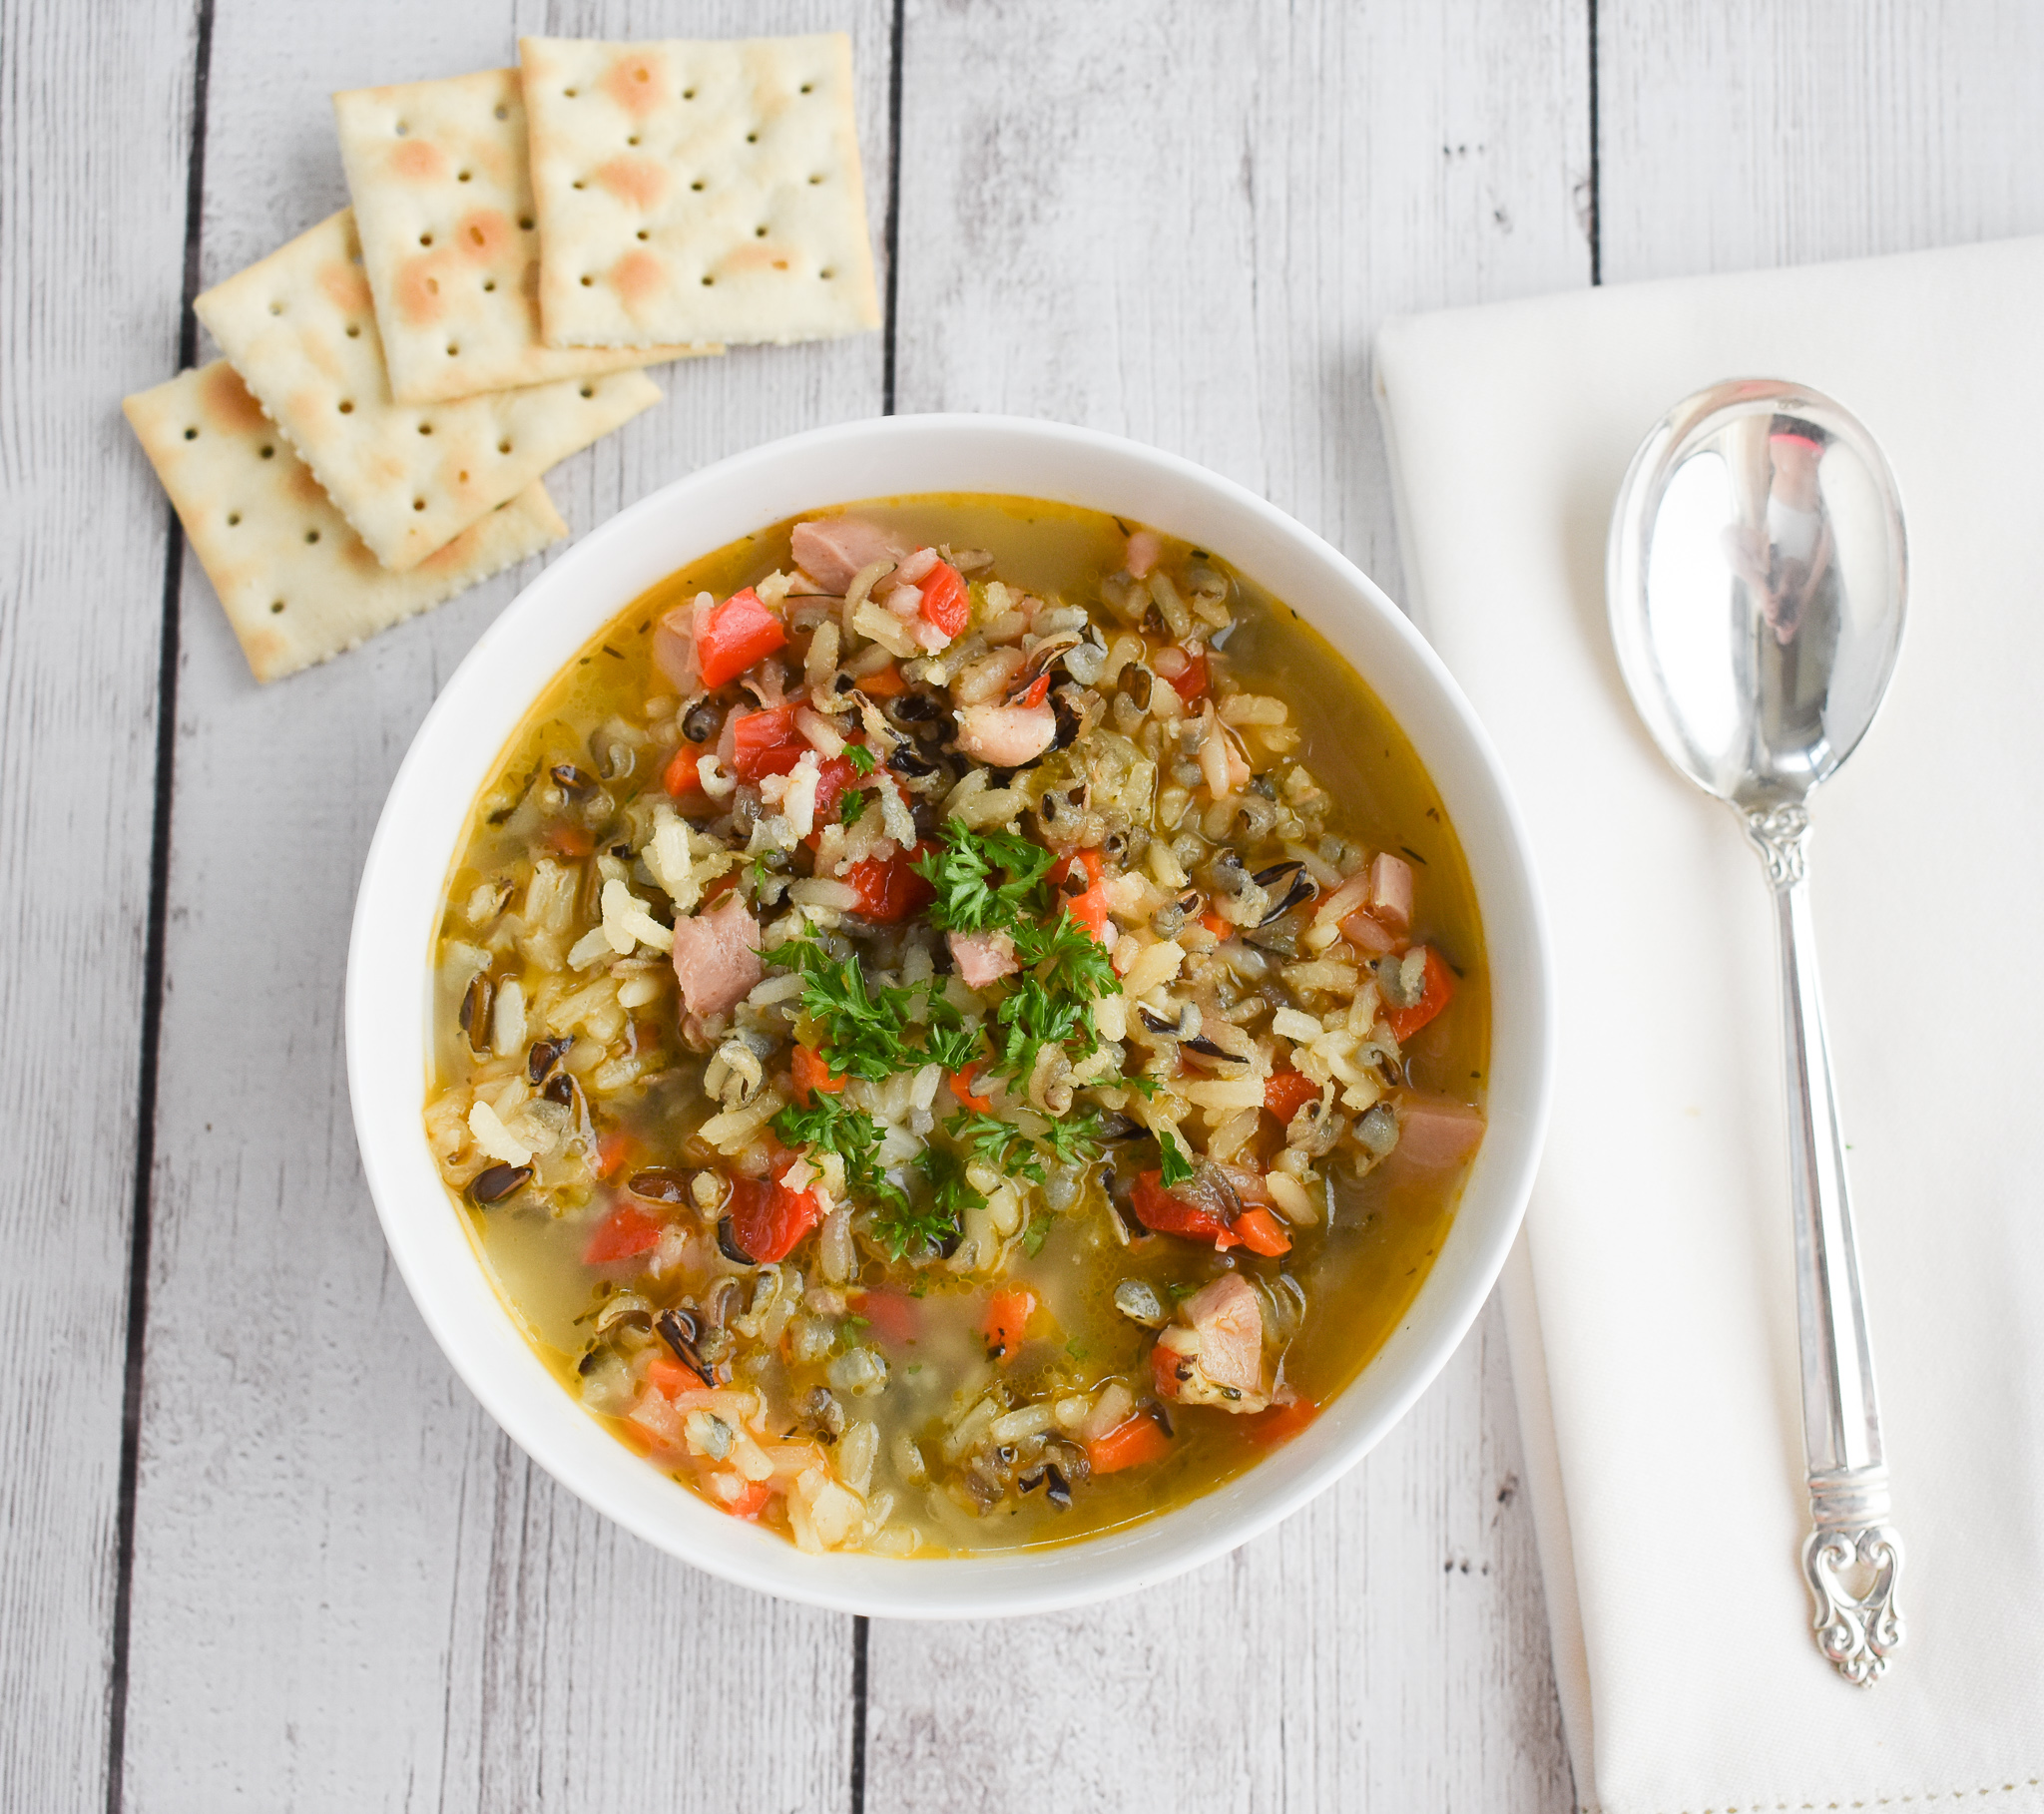 Gluten Free Chicken Noodle Soup - Love Your Body Well